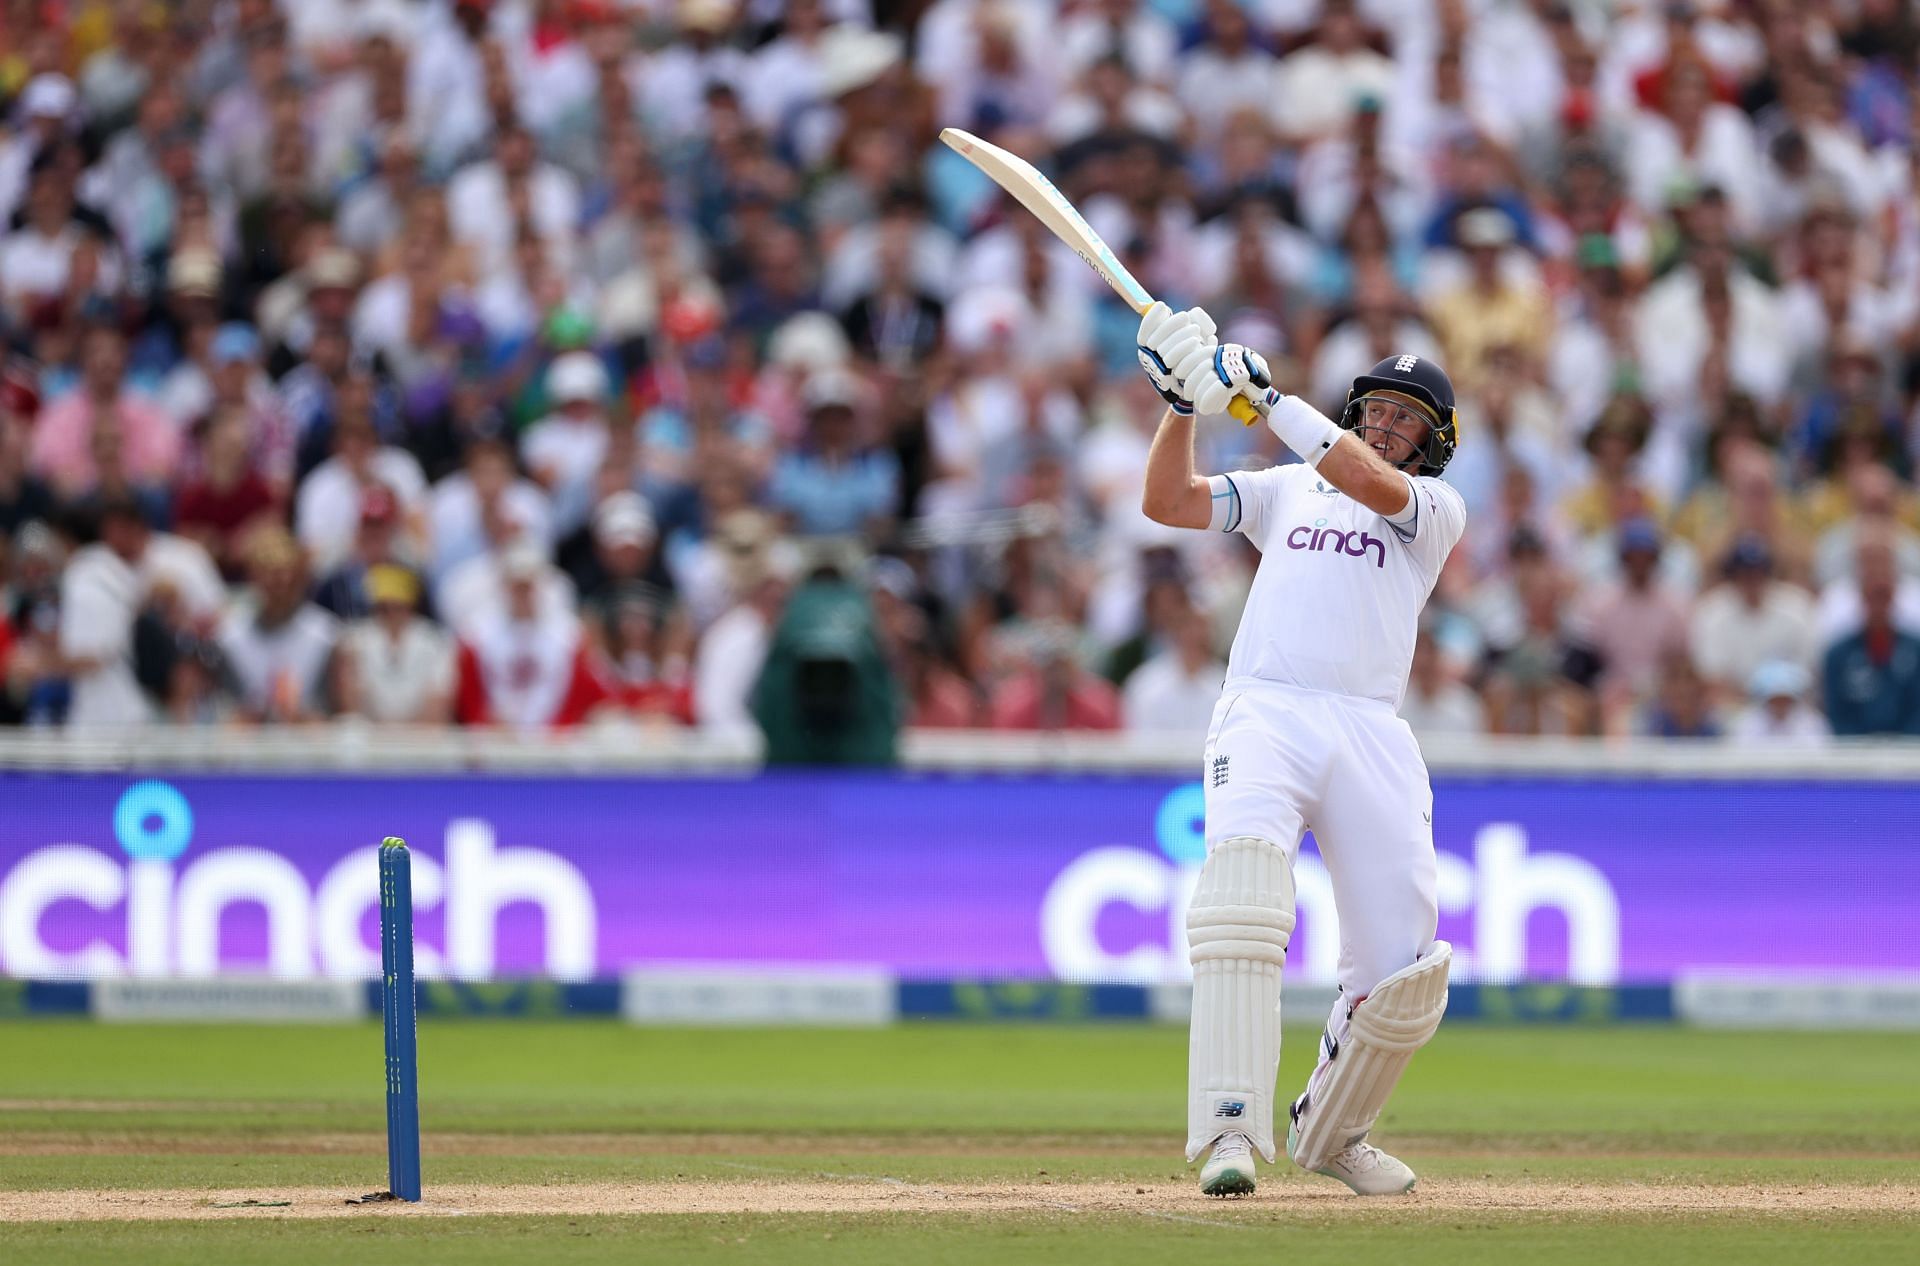 Joe Root is regarded as one of the best batters in the world technically.